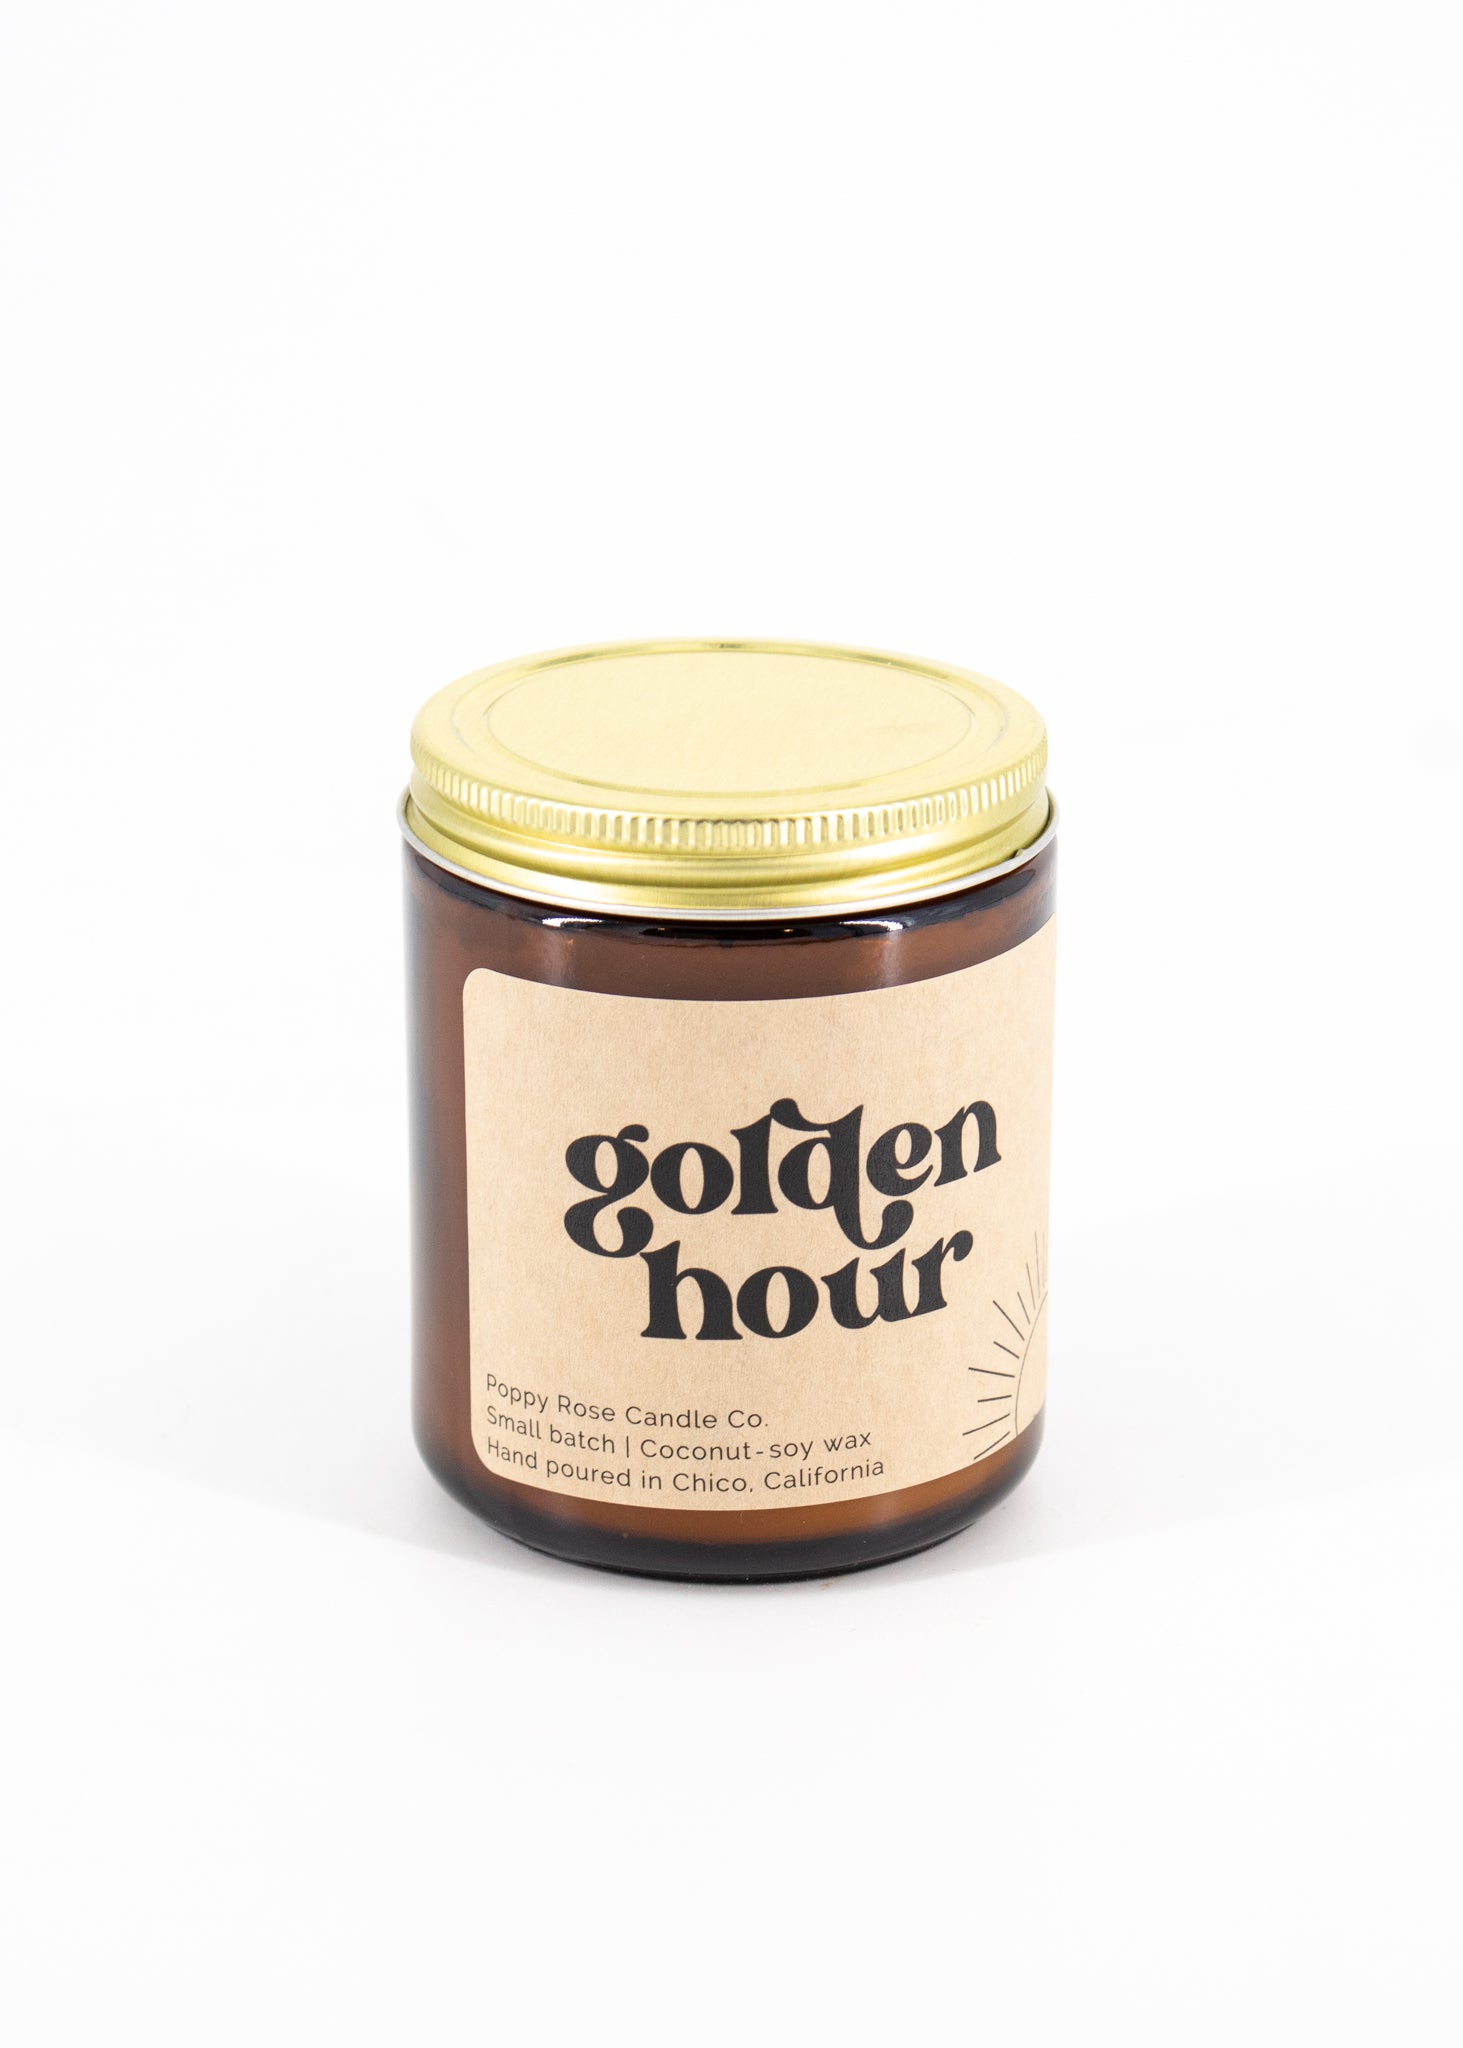 Golden Hour - Poppy Rose Candle Co. -  - Poppy & Rose Candle Co. - Wild Lark